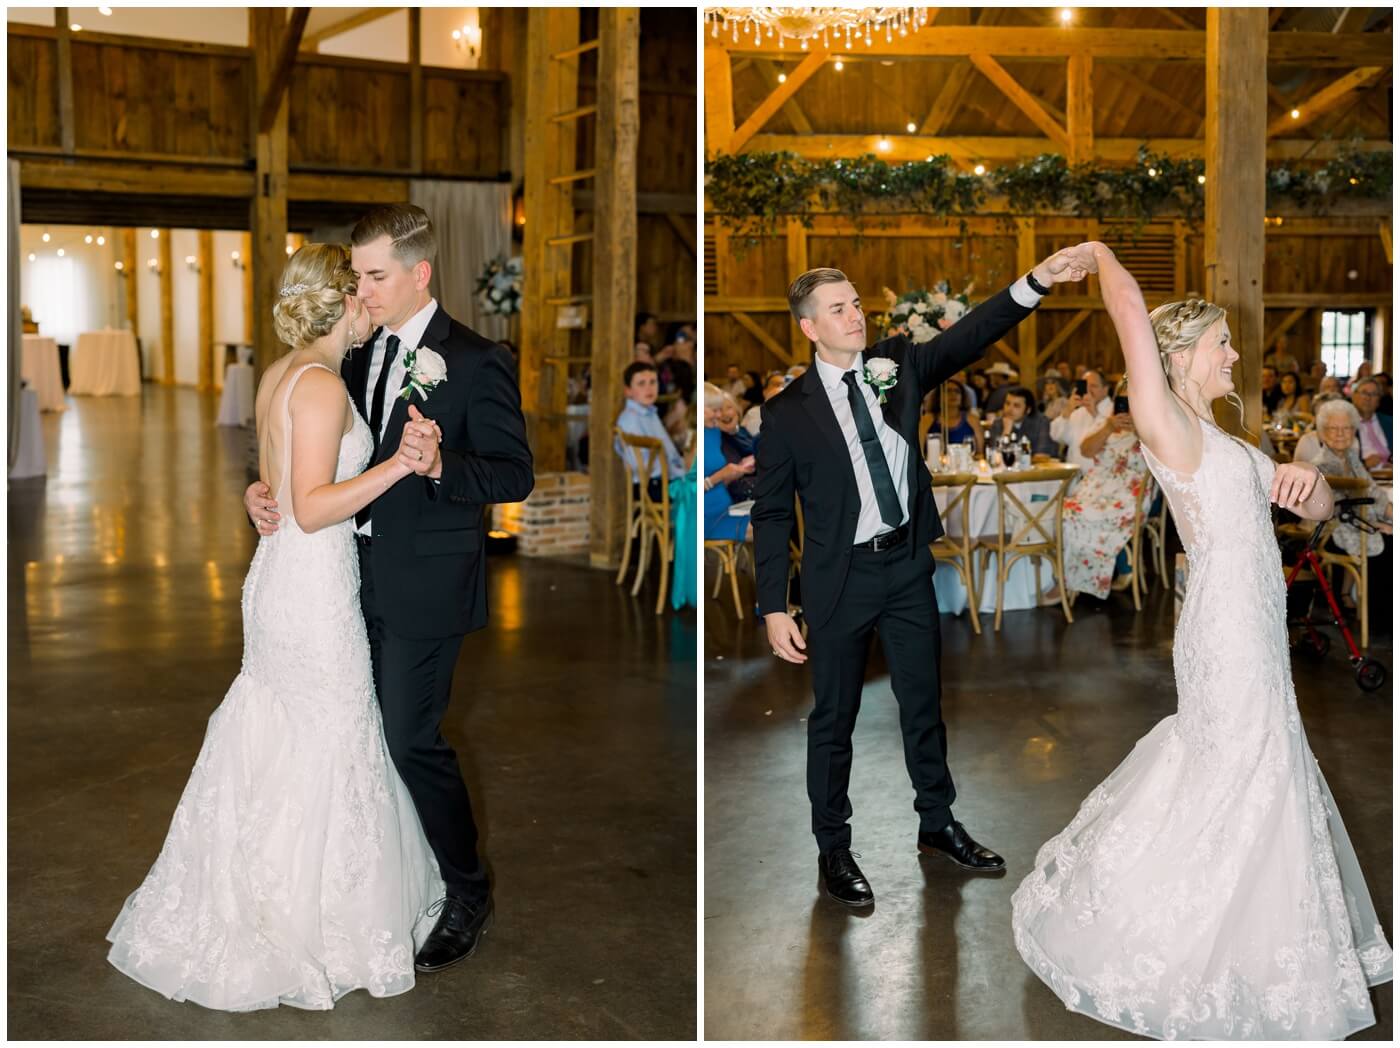 The couple share an intimate first dance